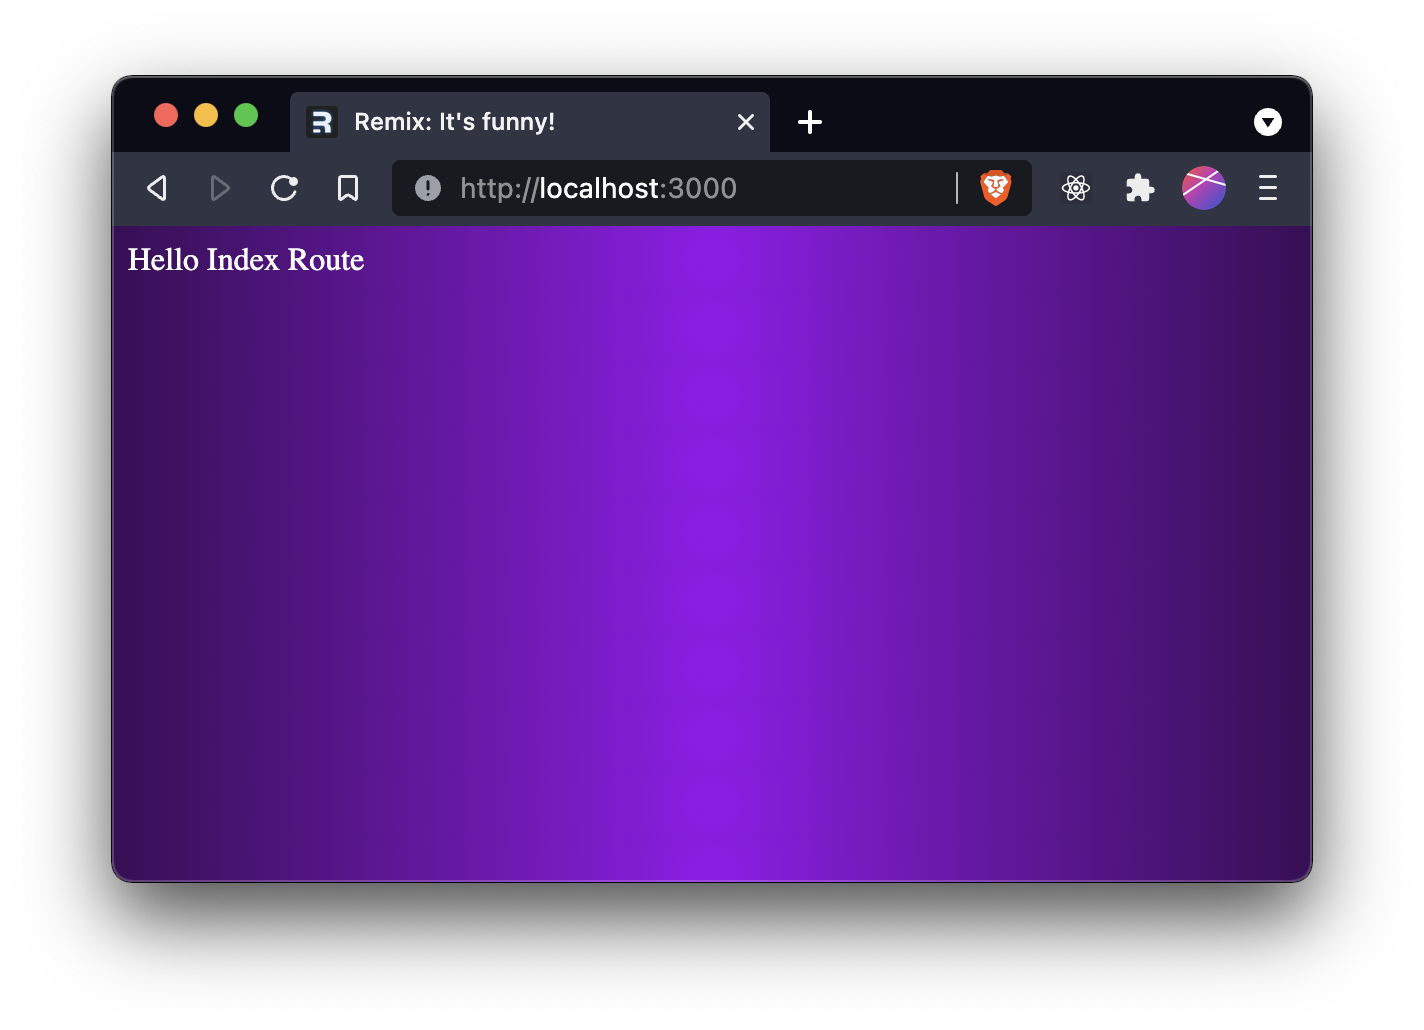 The homepage with a purple gradient background and white text with the words "Hello Index Route"